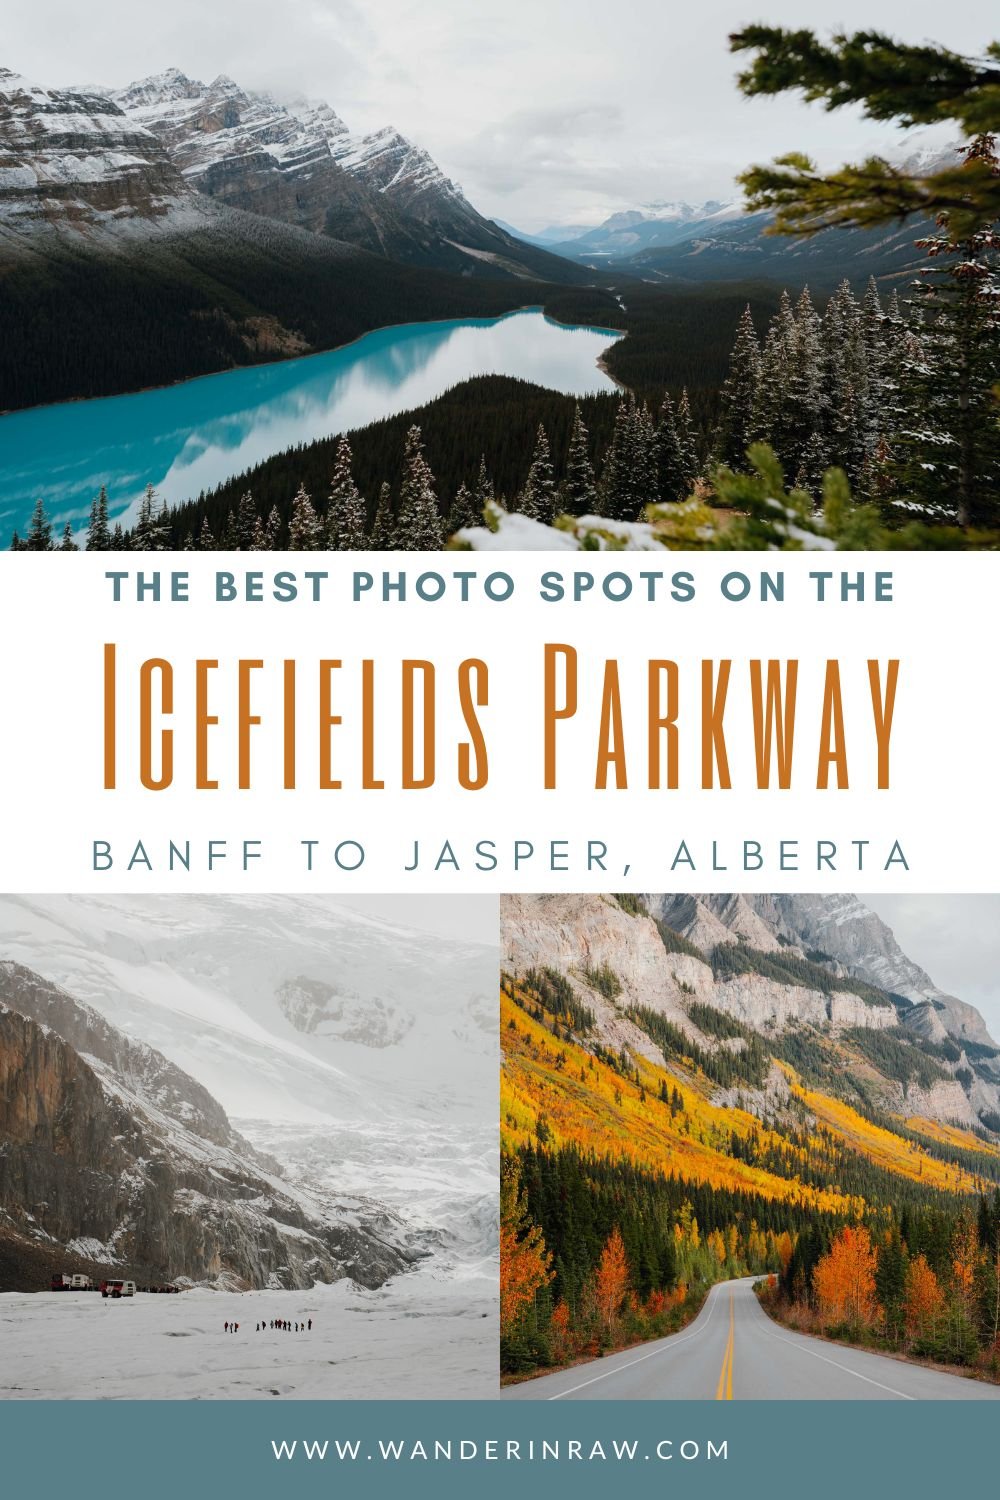 The Best Photo Spots on the Icefields Parkway